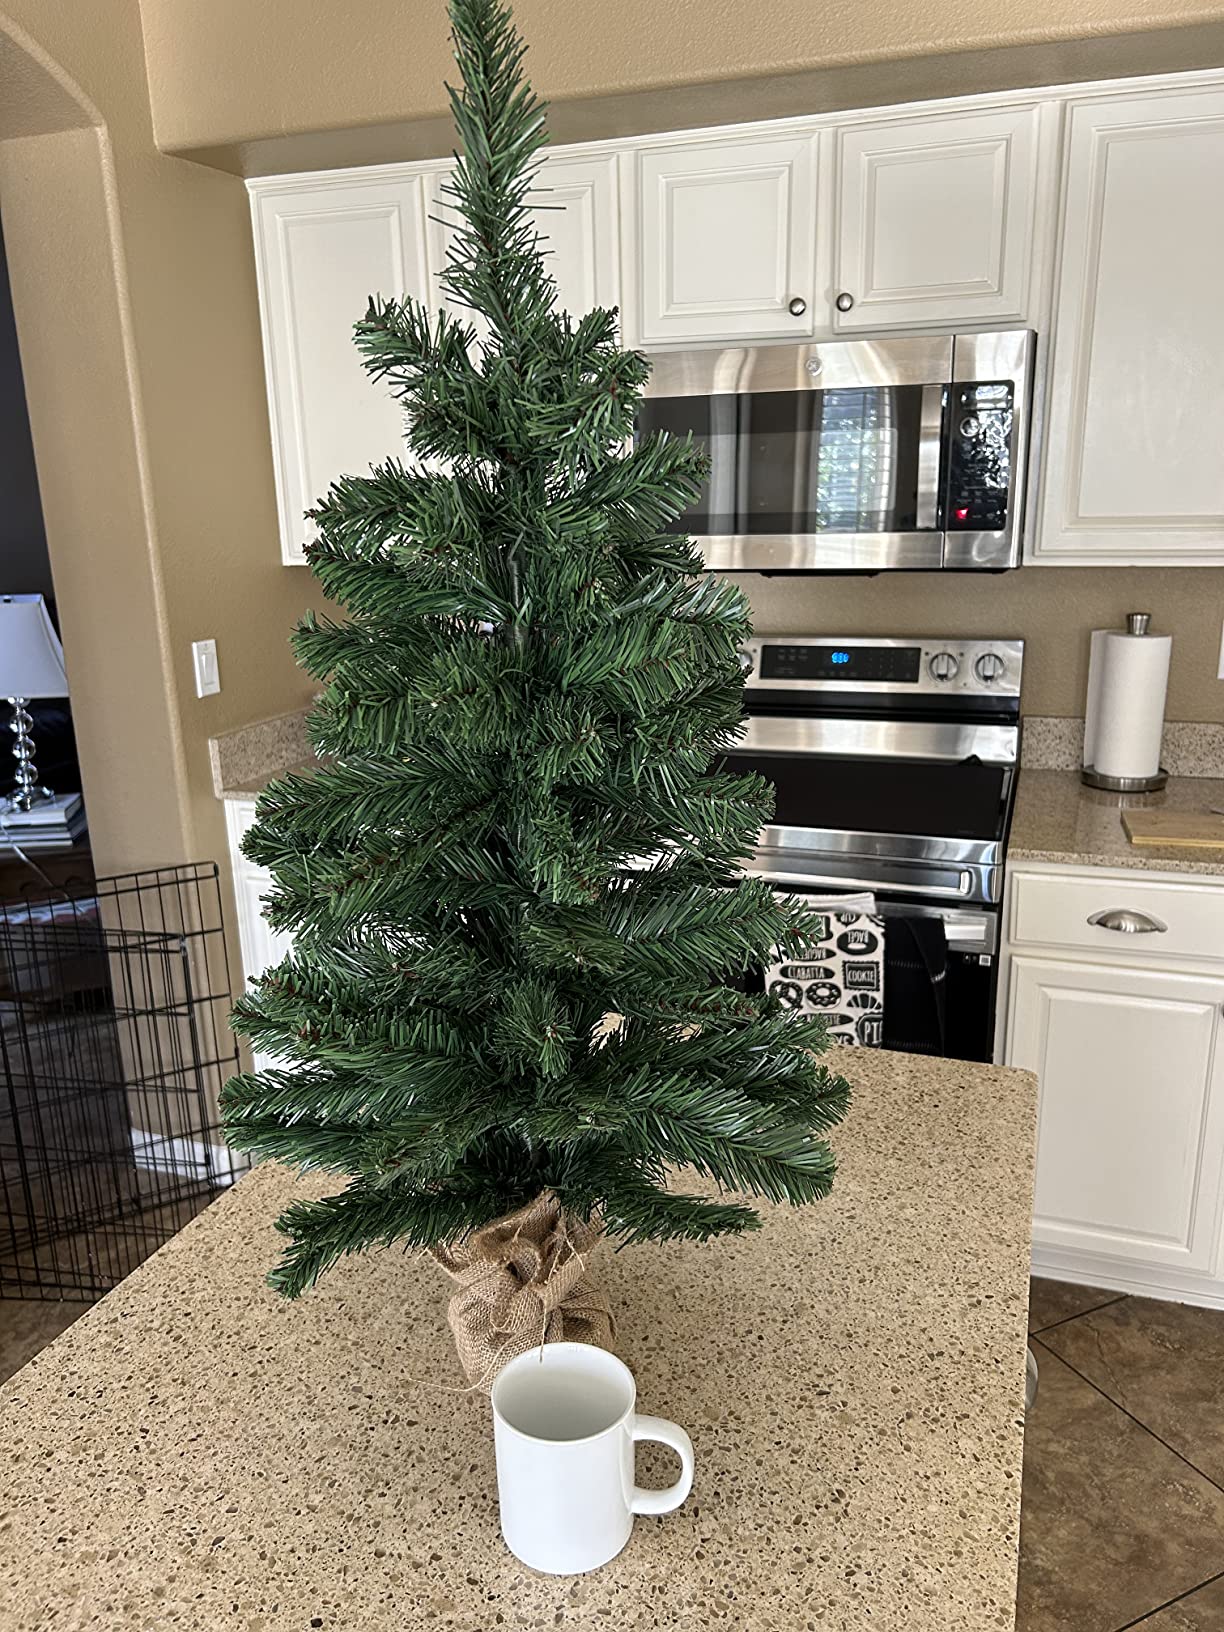 Great-looking, quality tree